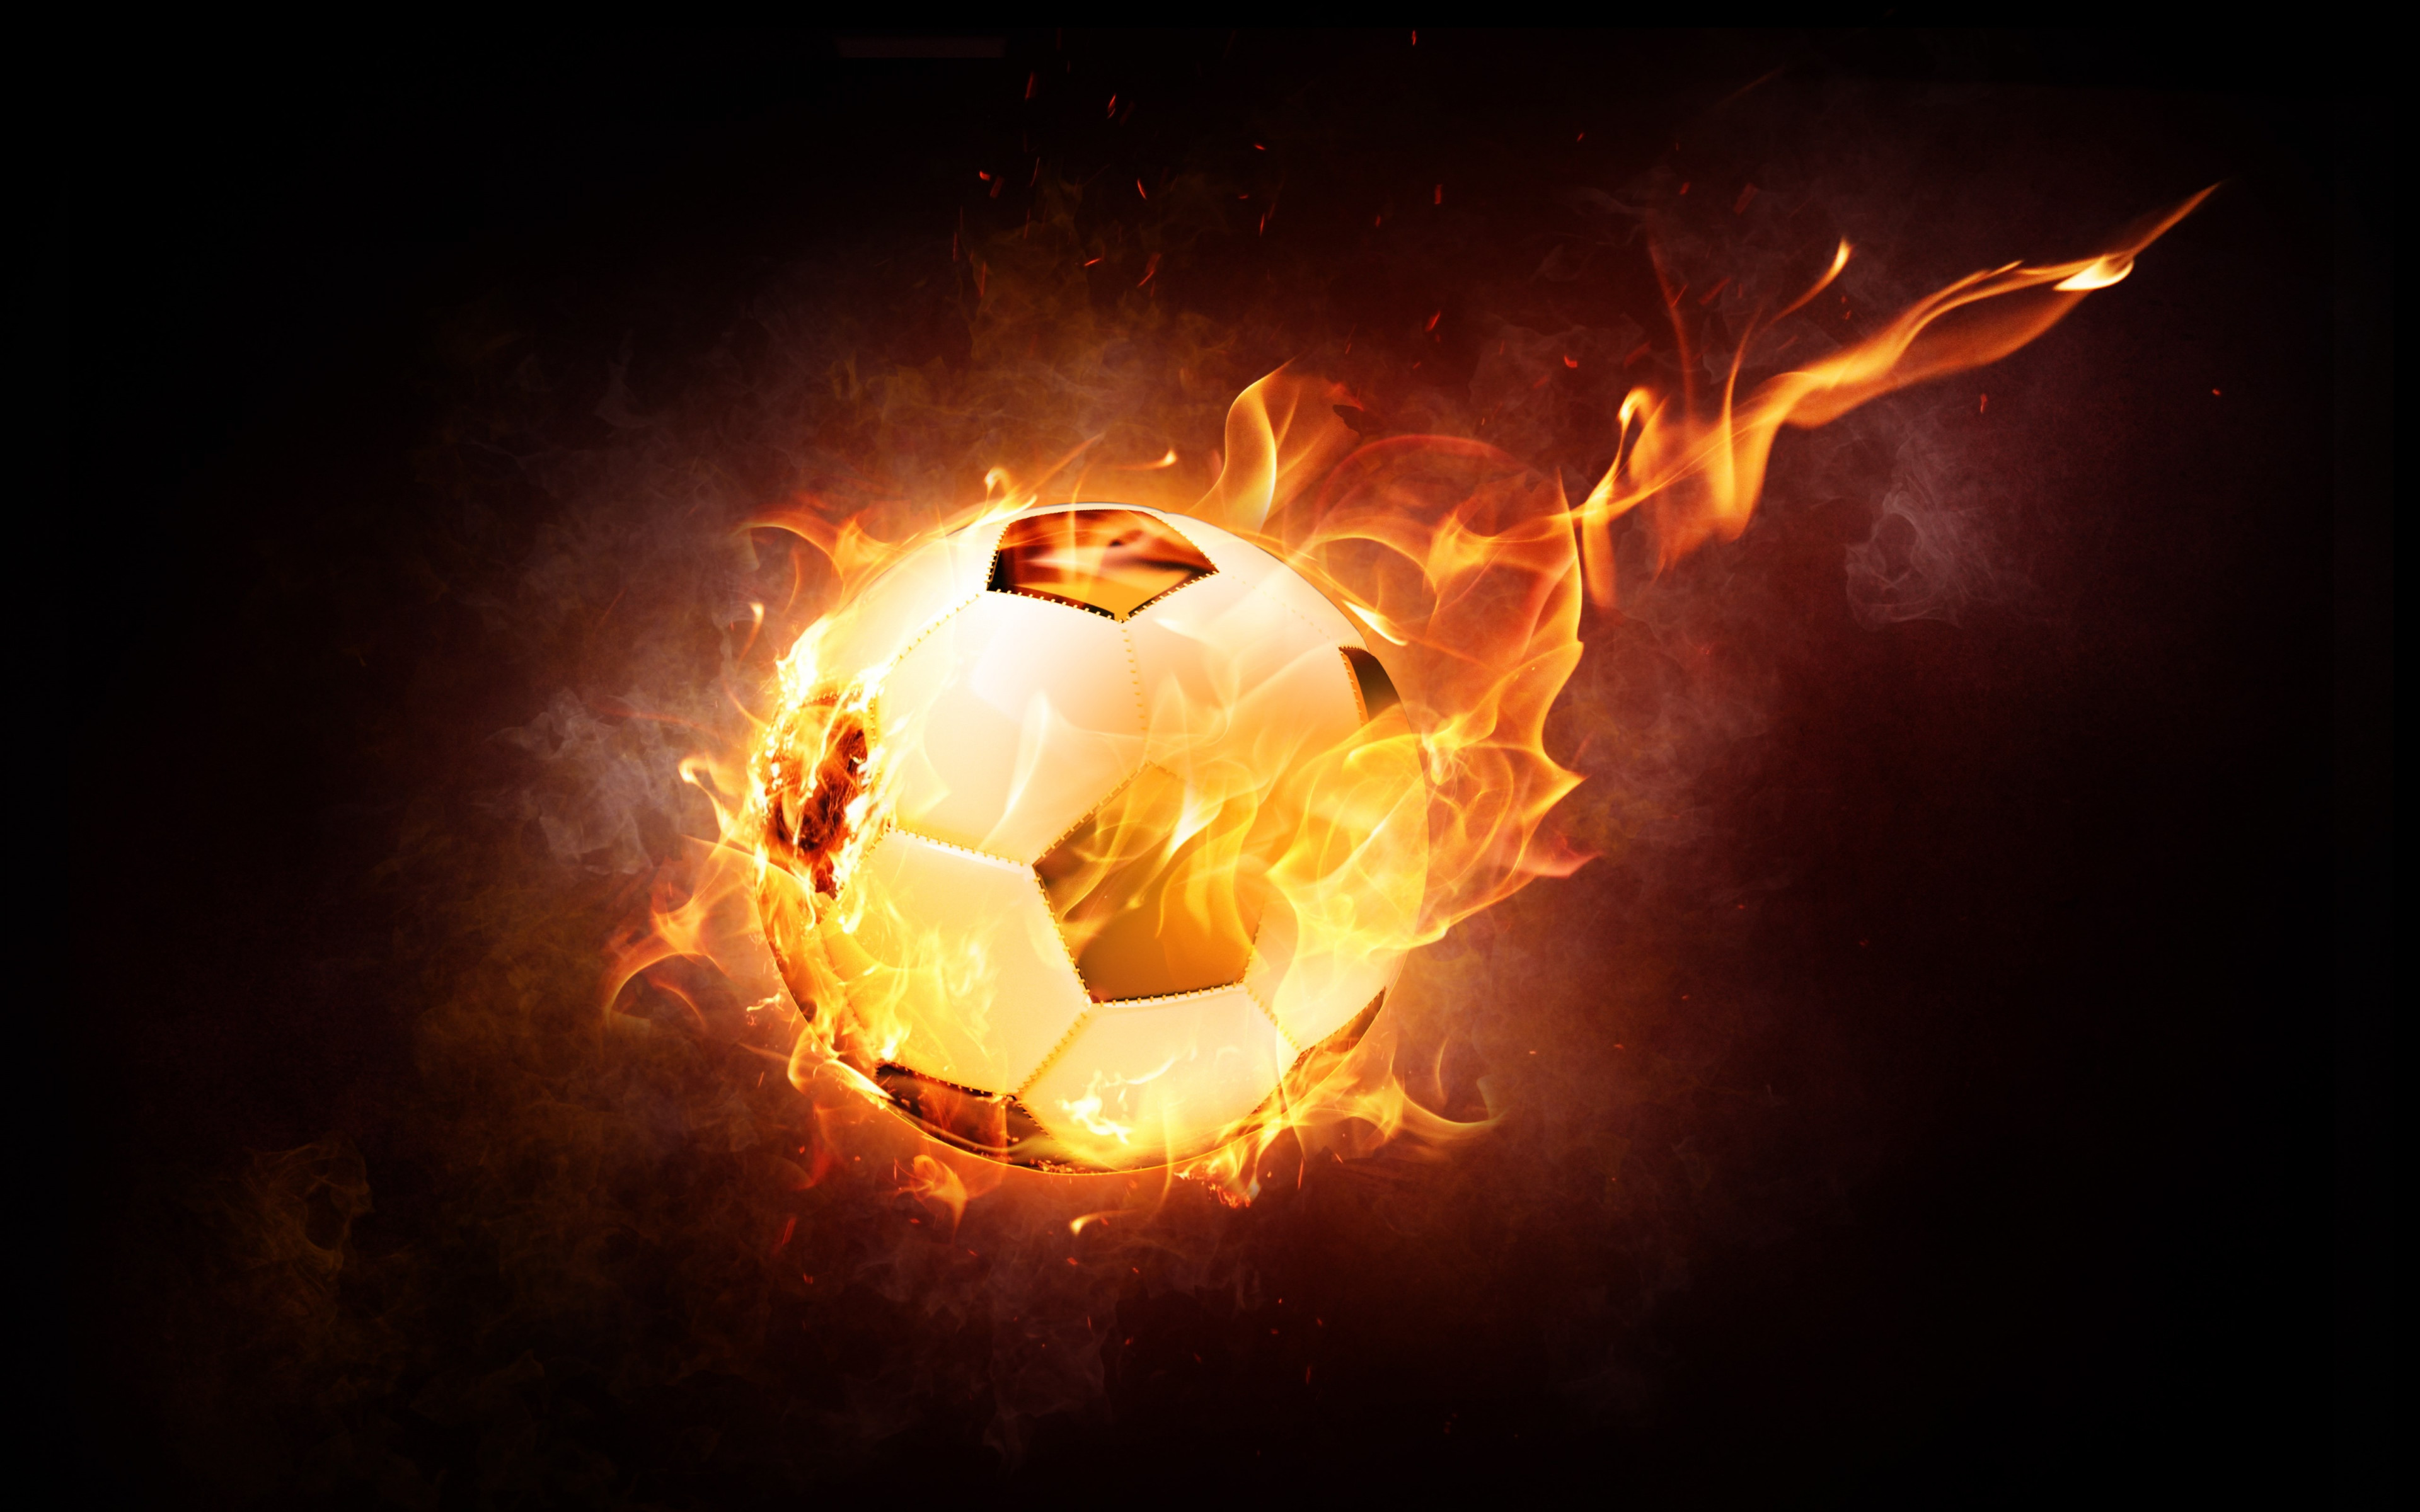 The football ball is on fire wallpaper 3840x2400